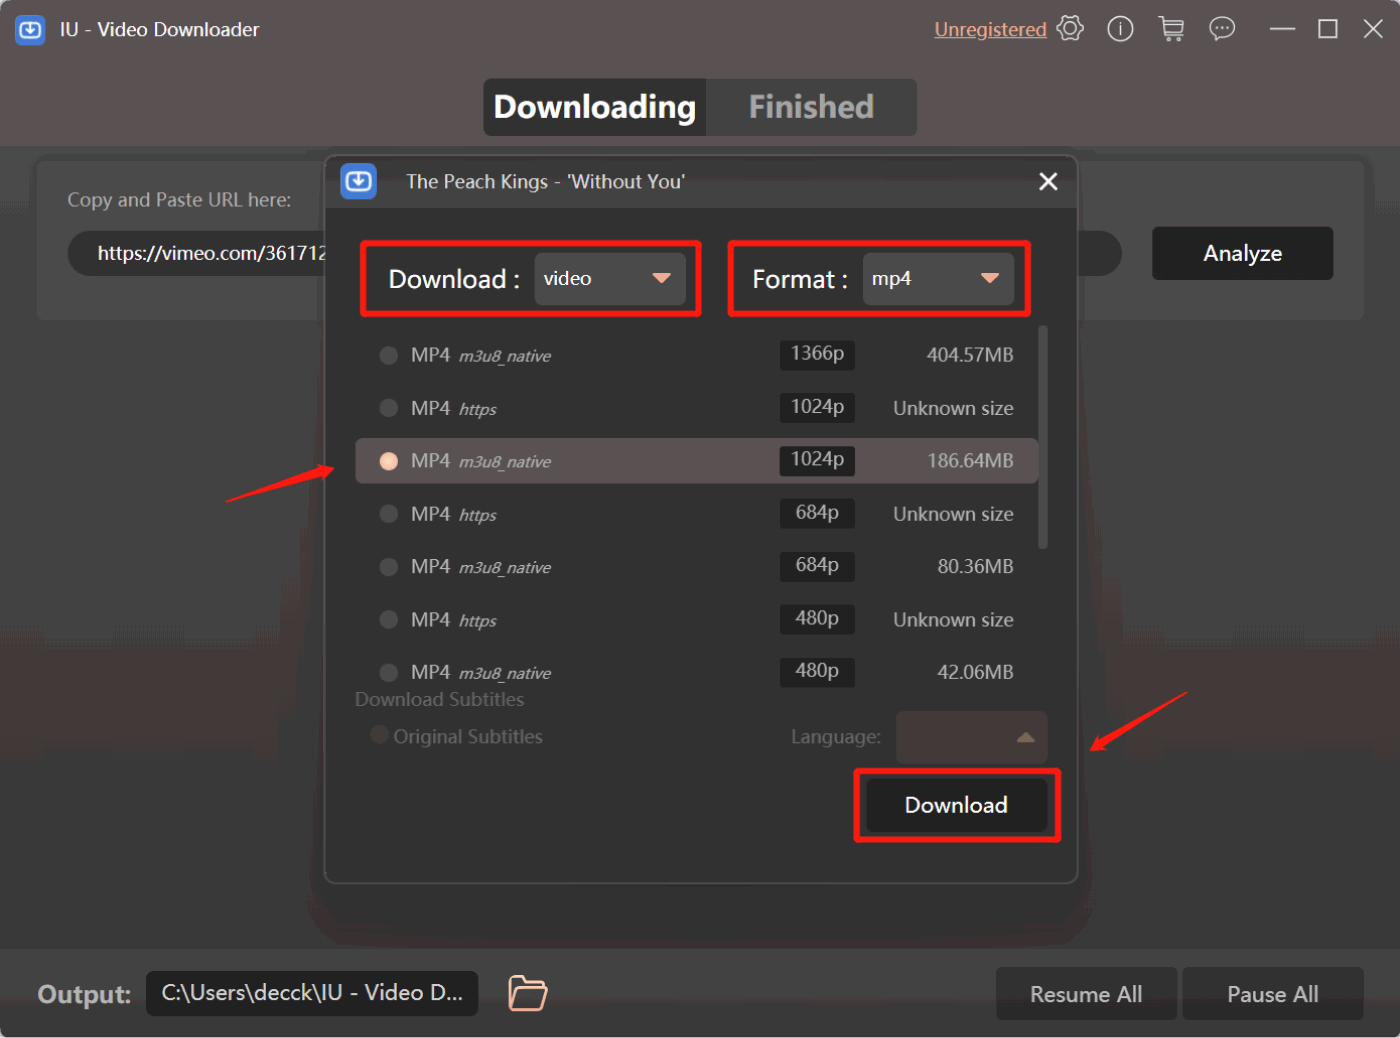 Choose The Output Format You Want And Download